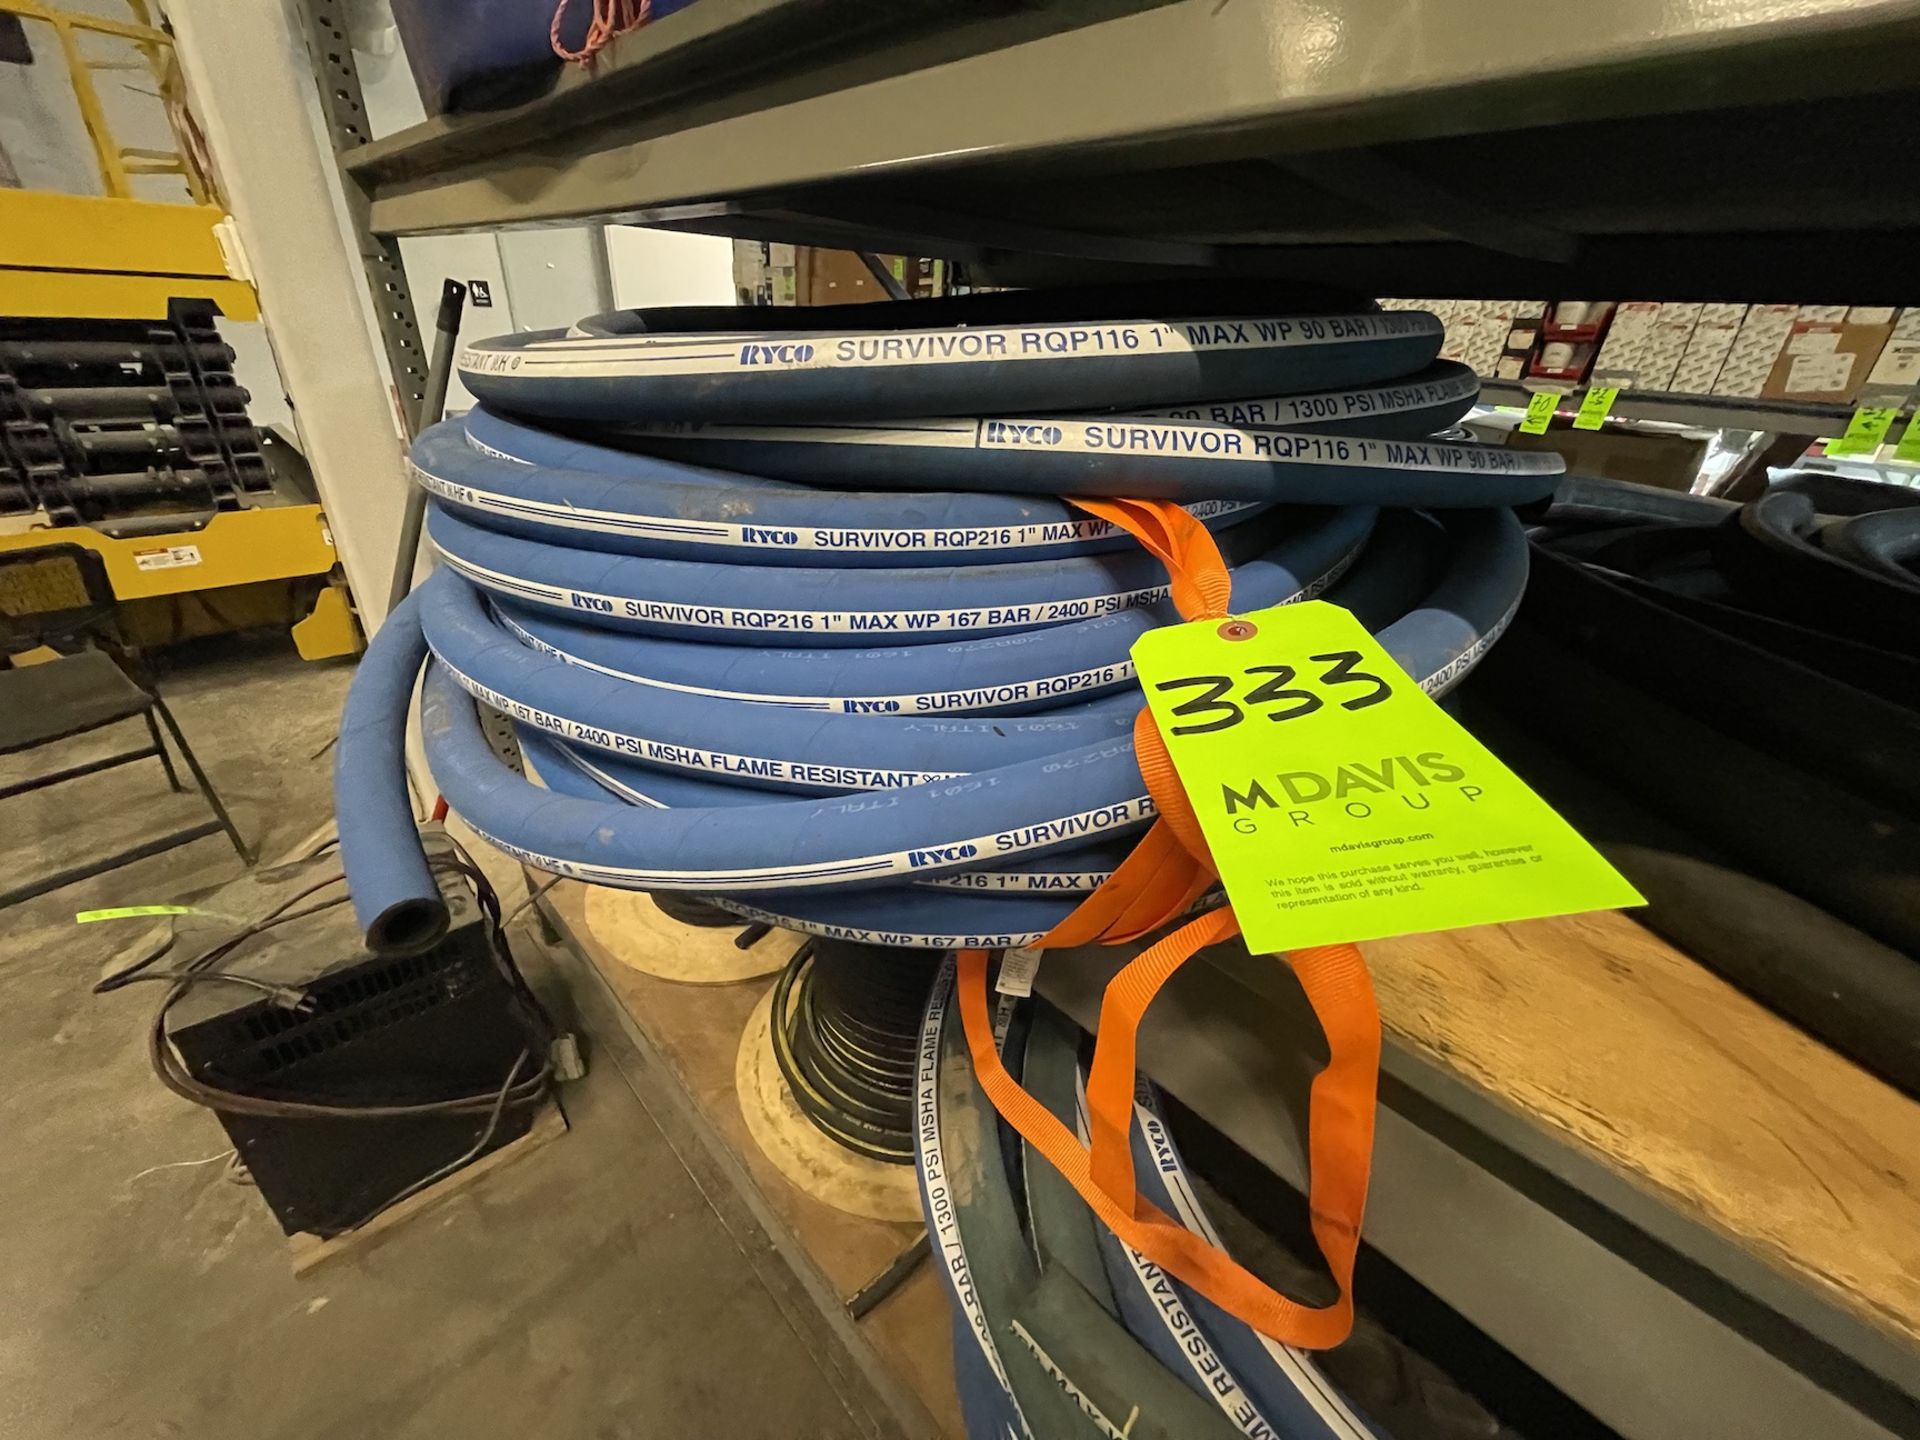 RYCO SURVIVOR RQP116 HYDRAULIC HOSE 2400psi (ALL PURCHASES MUST BE PAID FOR AND REMOVED BY 5/4/